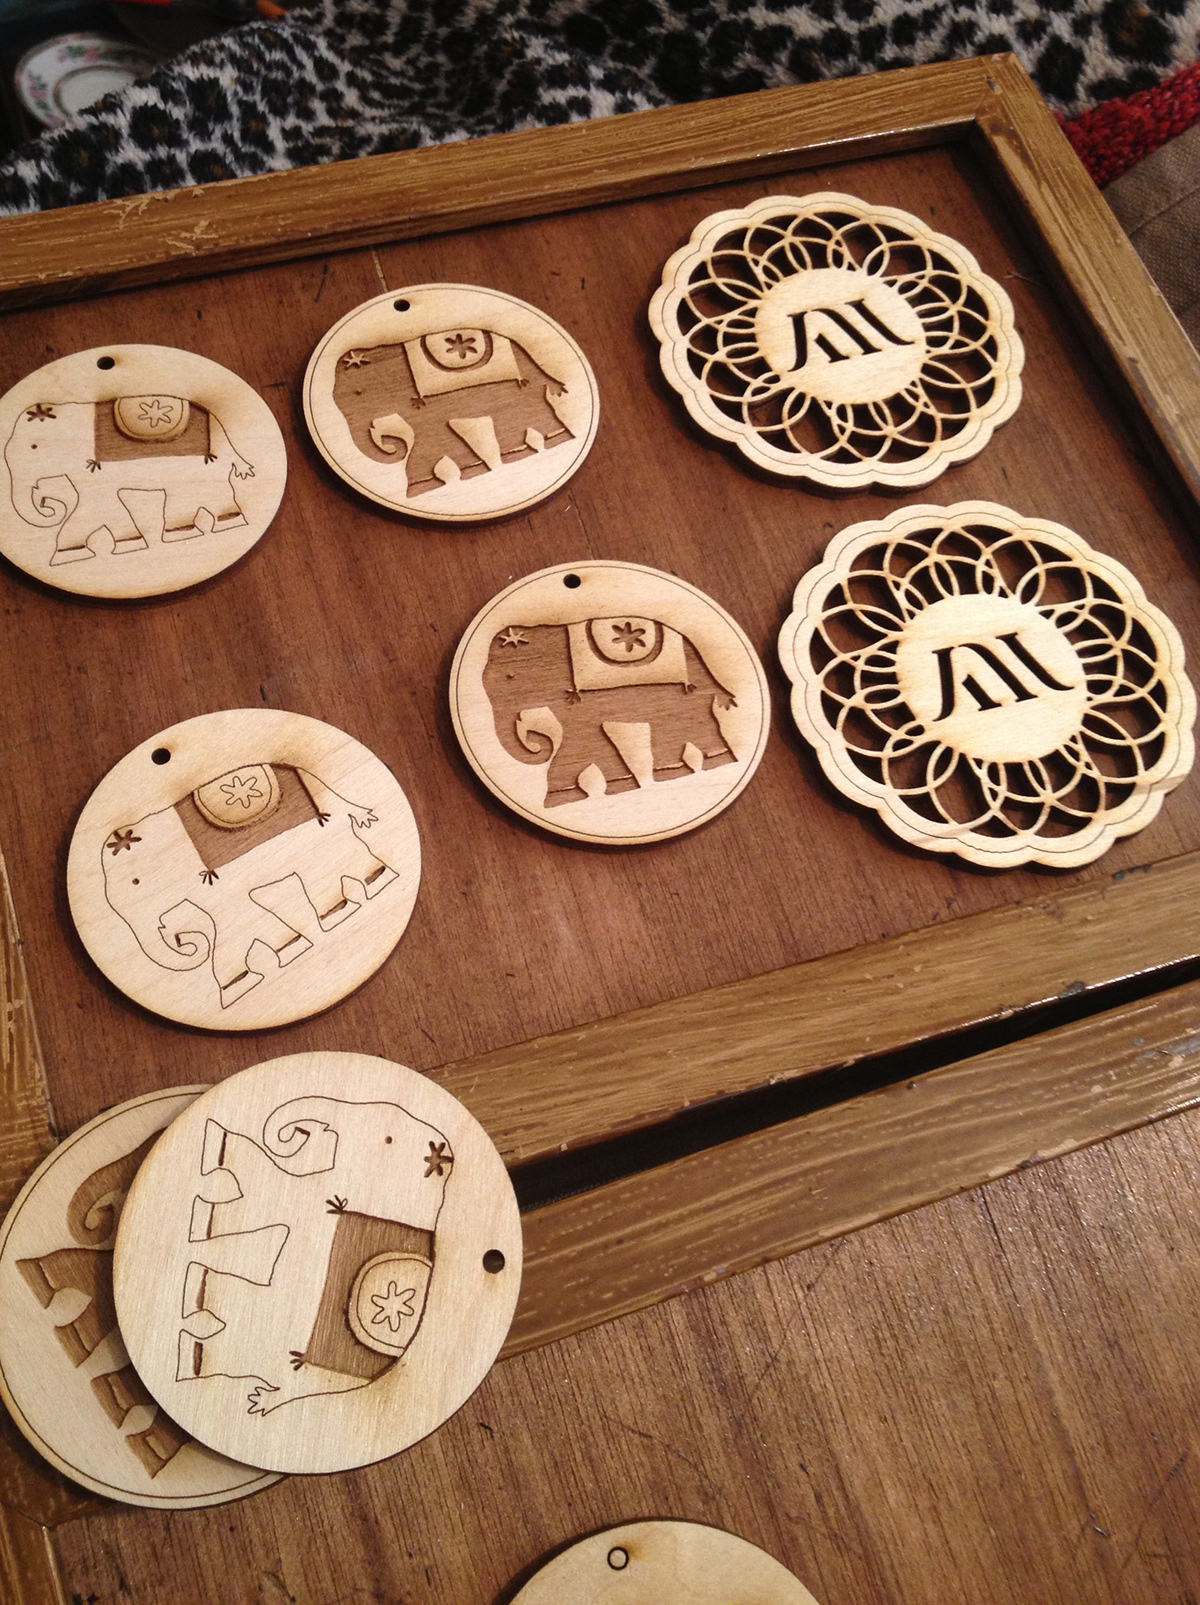 Jewellery earrings laser cut wood elephant Ethnic Unique hand made crafted craft indian elephant circle cut plywood East is West